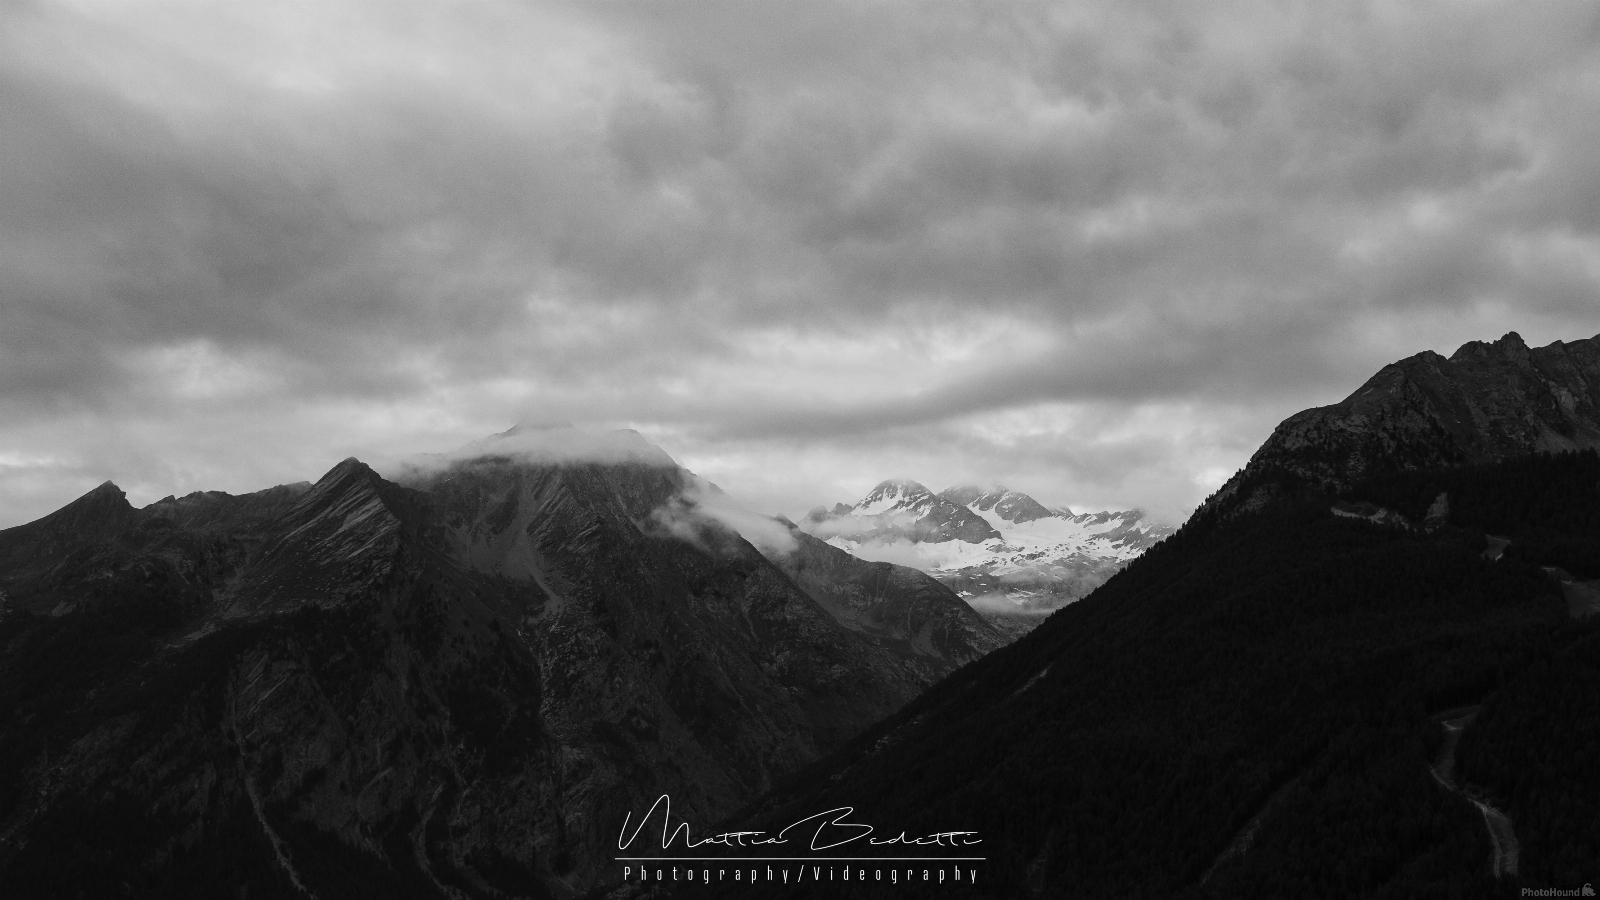 Image of Gimillan - Viewpoint over Cogne by Mattia Bedetti